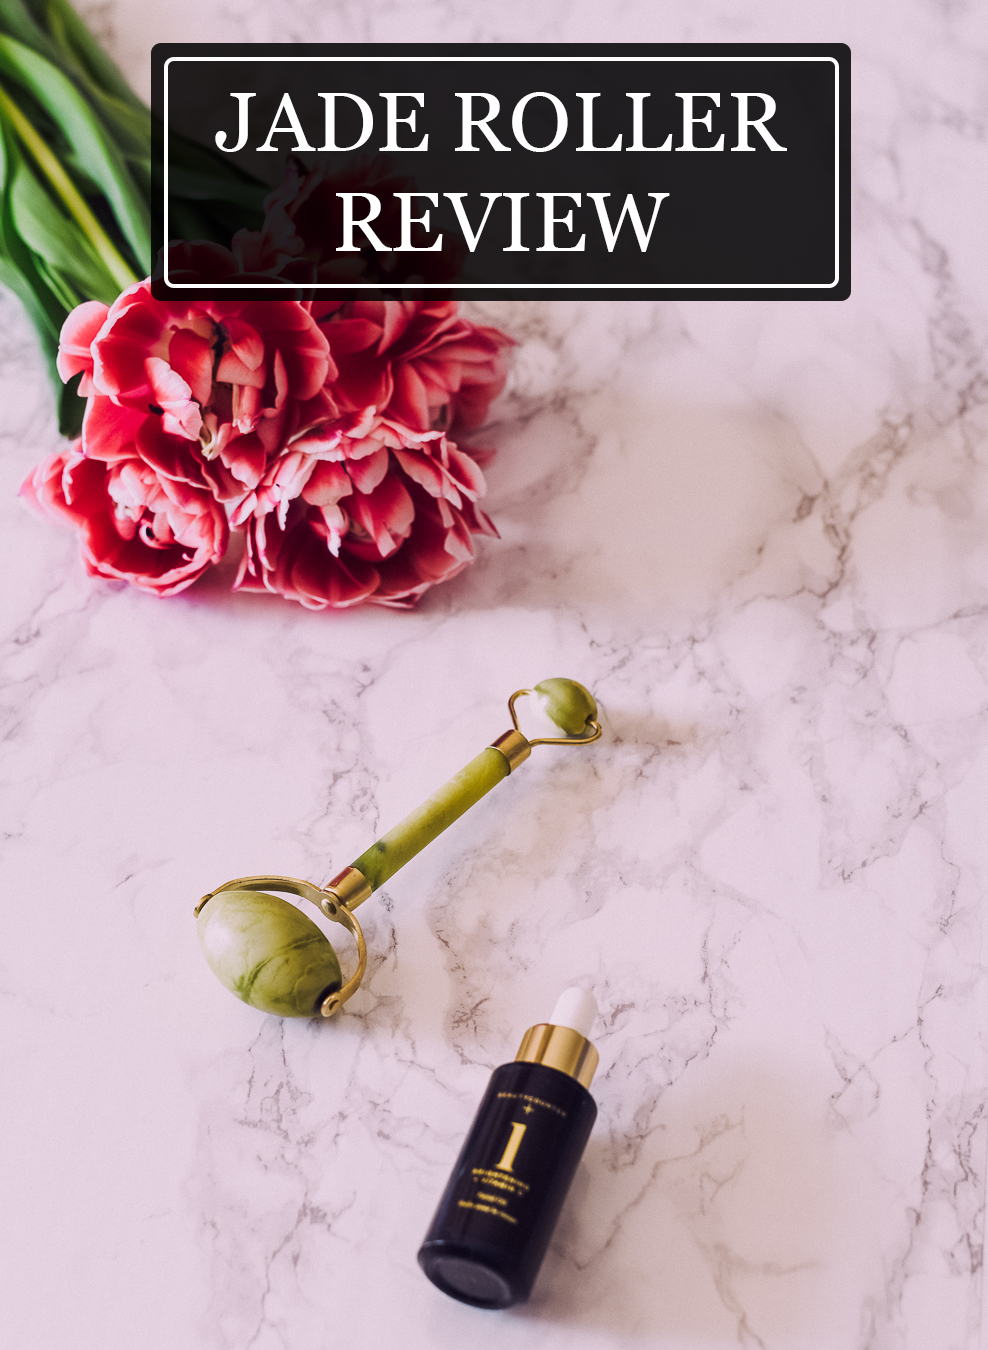 jade rolling 101: jade roller review by chicago beauty blogger Visions of Vogue